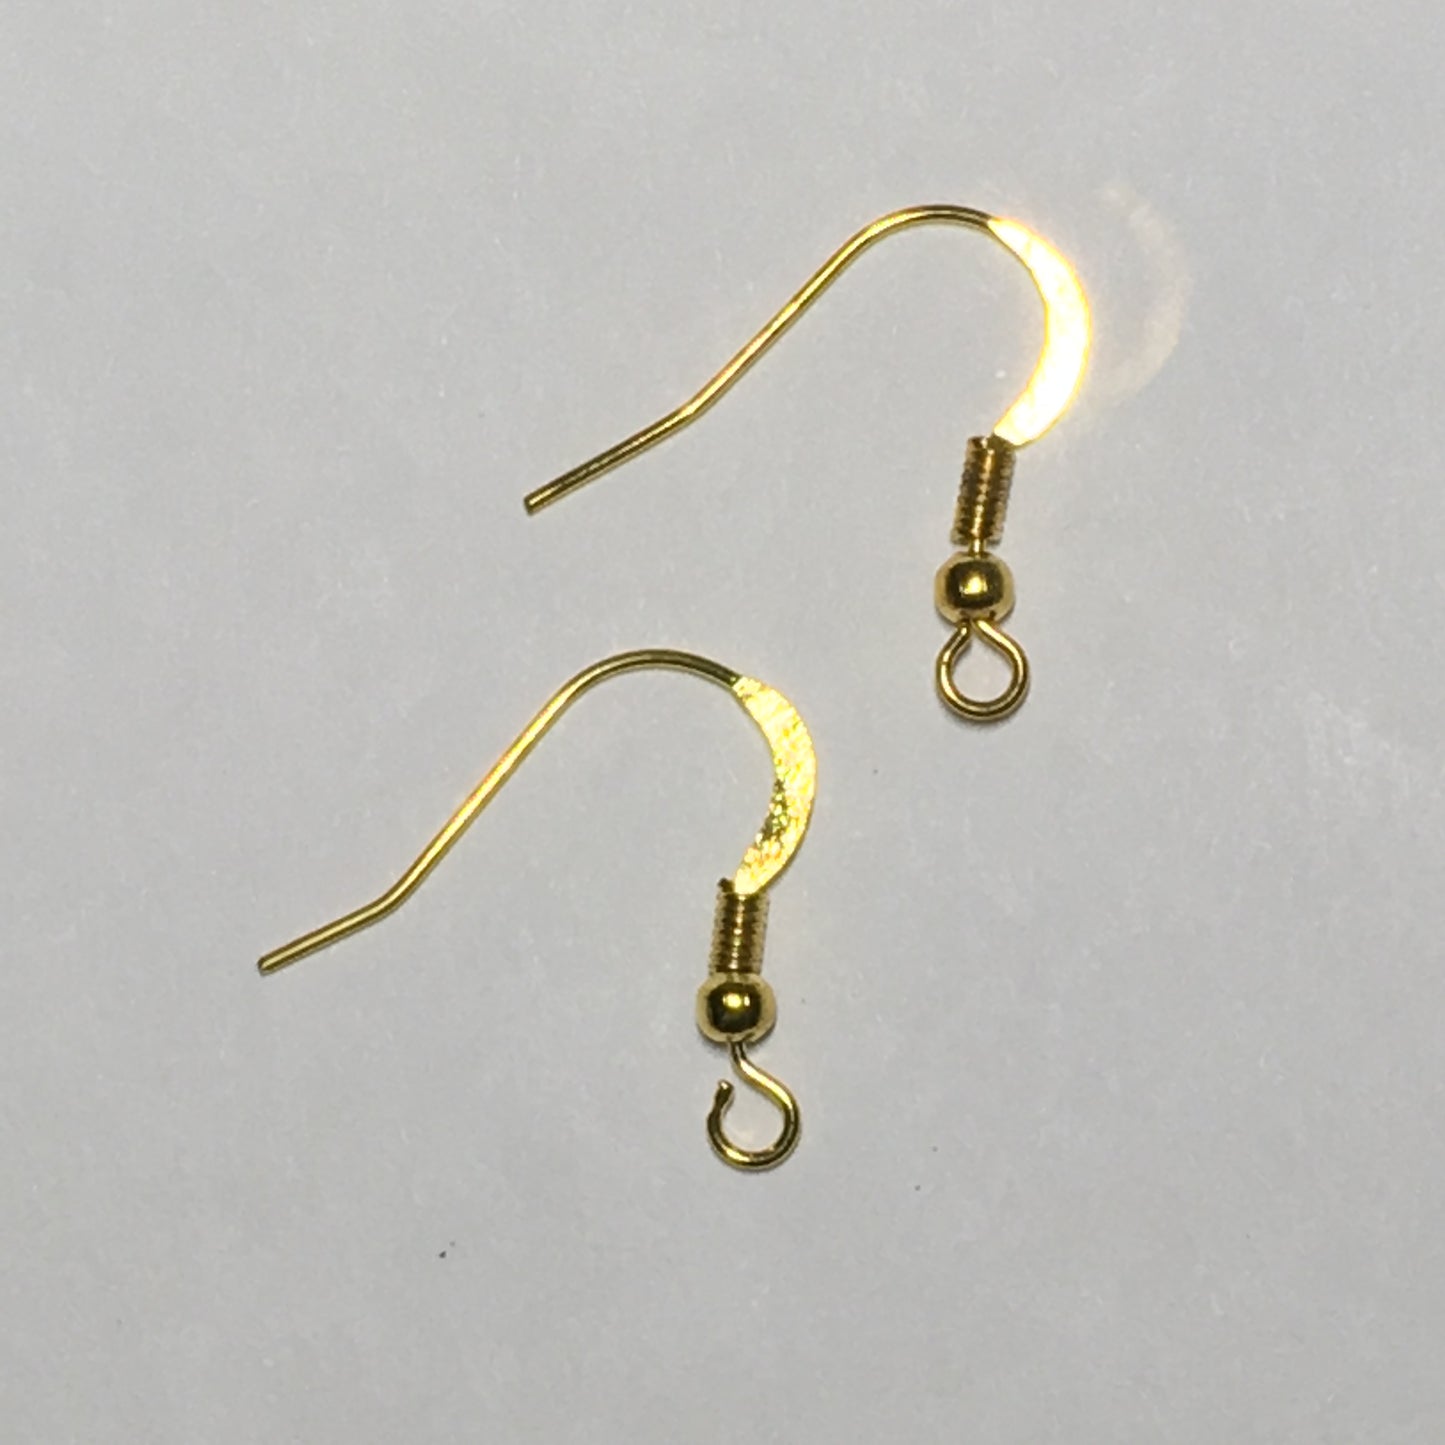 22-Gauge 11 mm Gold Flattened French Fish Hook Ear Wires - 1, 5 or 10 Pair